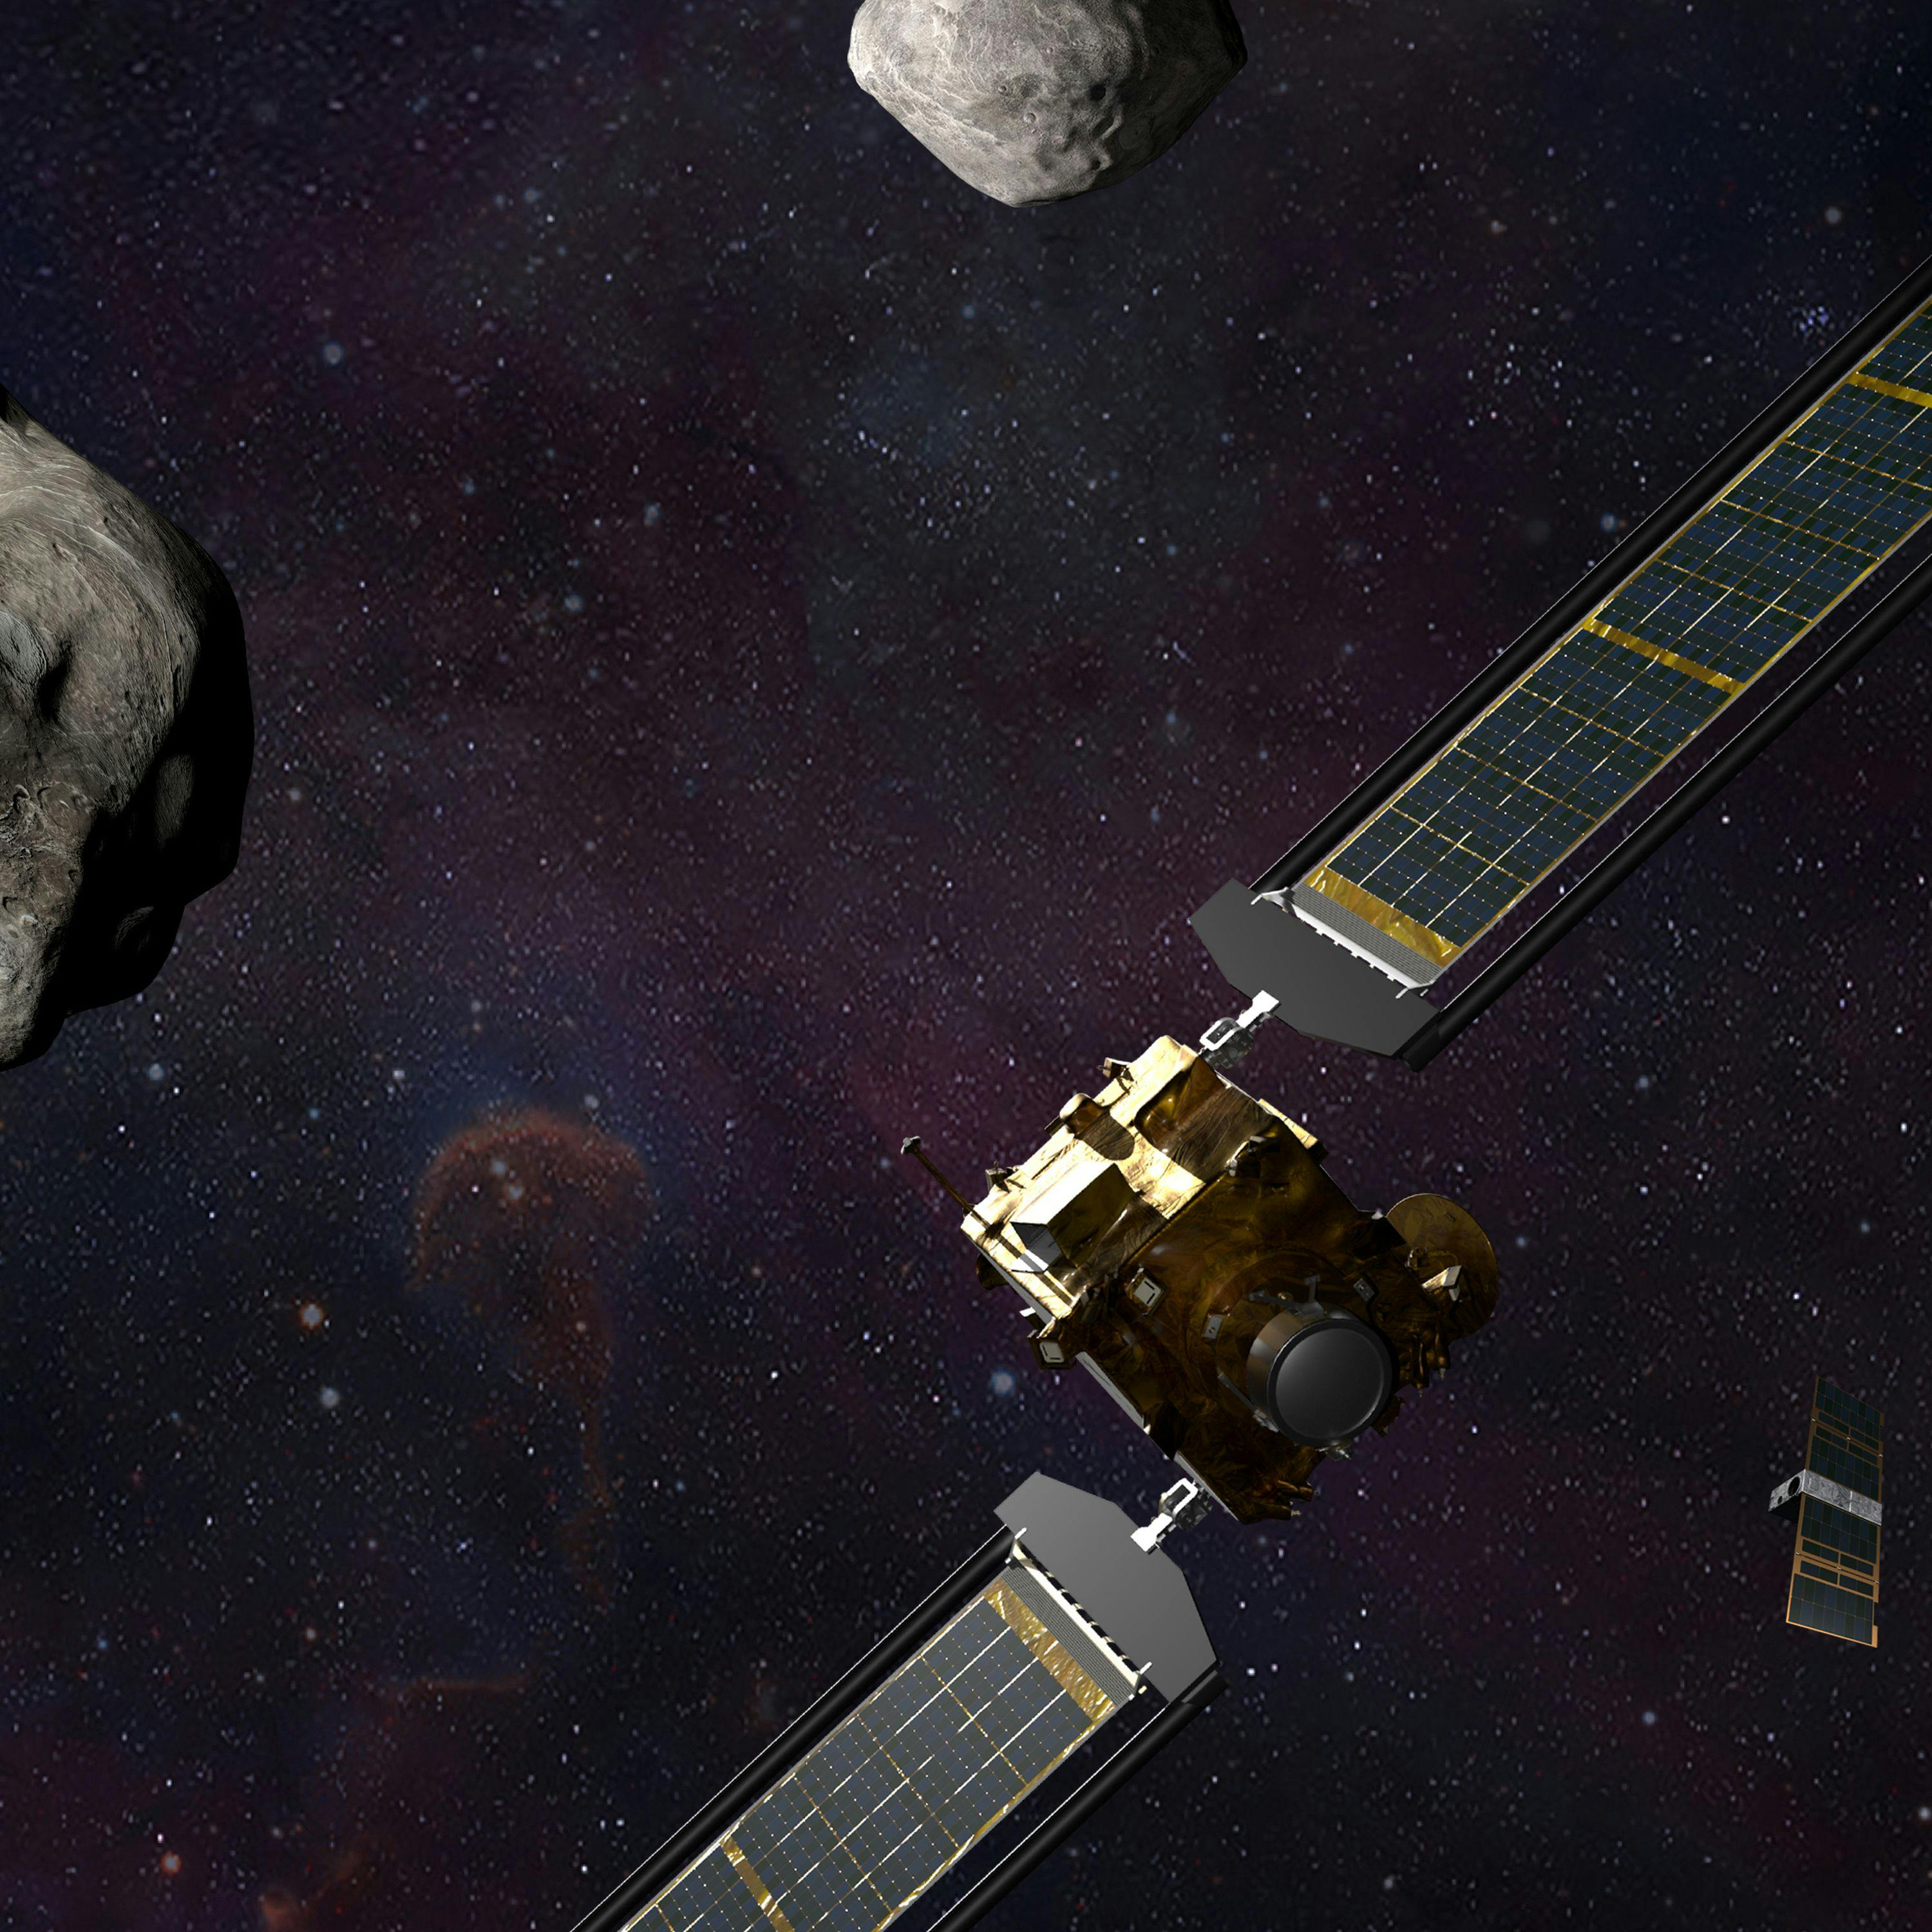 Deflecting asteroids with NASA’s DART mission